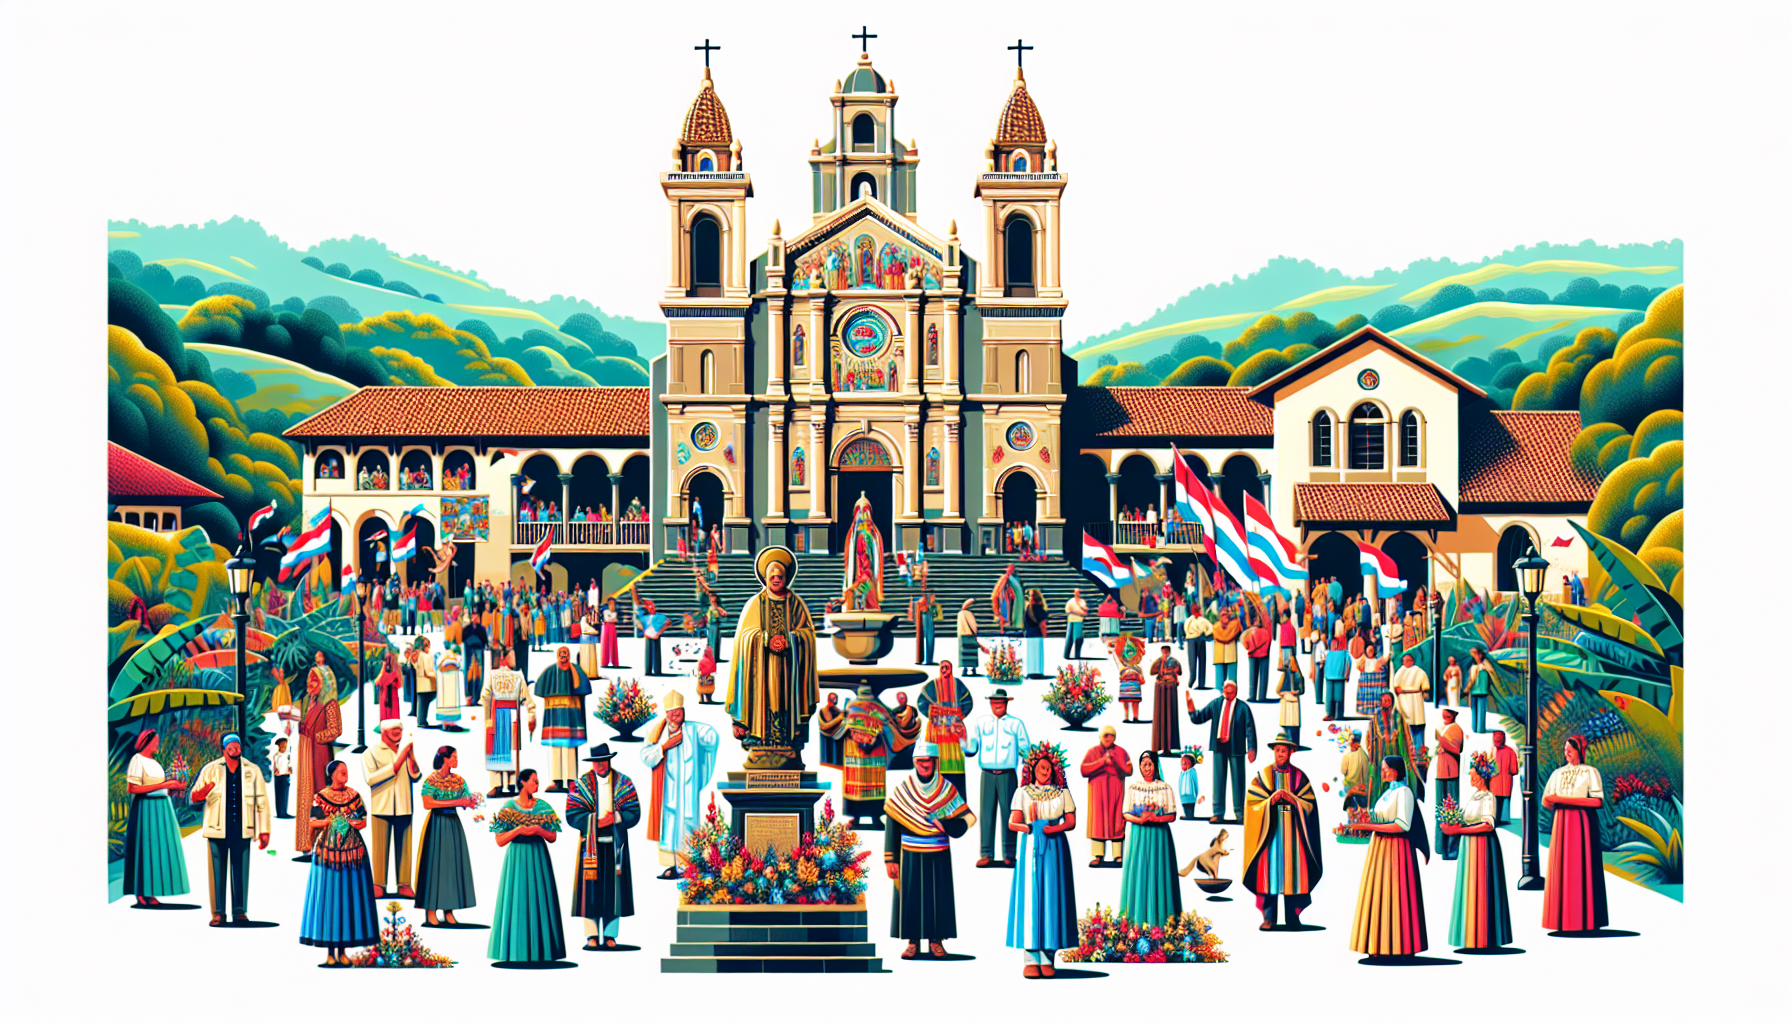 Create an image that captures the essence of 'El Santo de Costa Rica: Historia y Devoción'. Depict a beautiful and historic Costa Rican church adorned with vibrant decorations, with a statue of the re